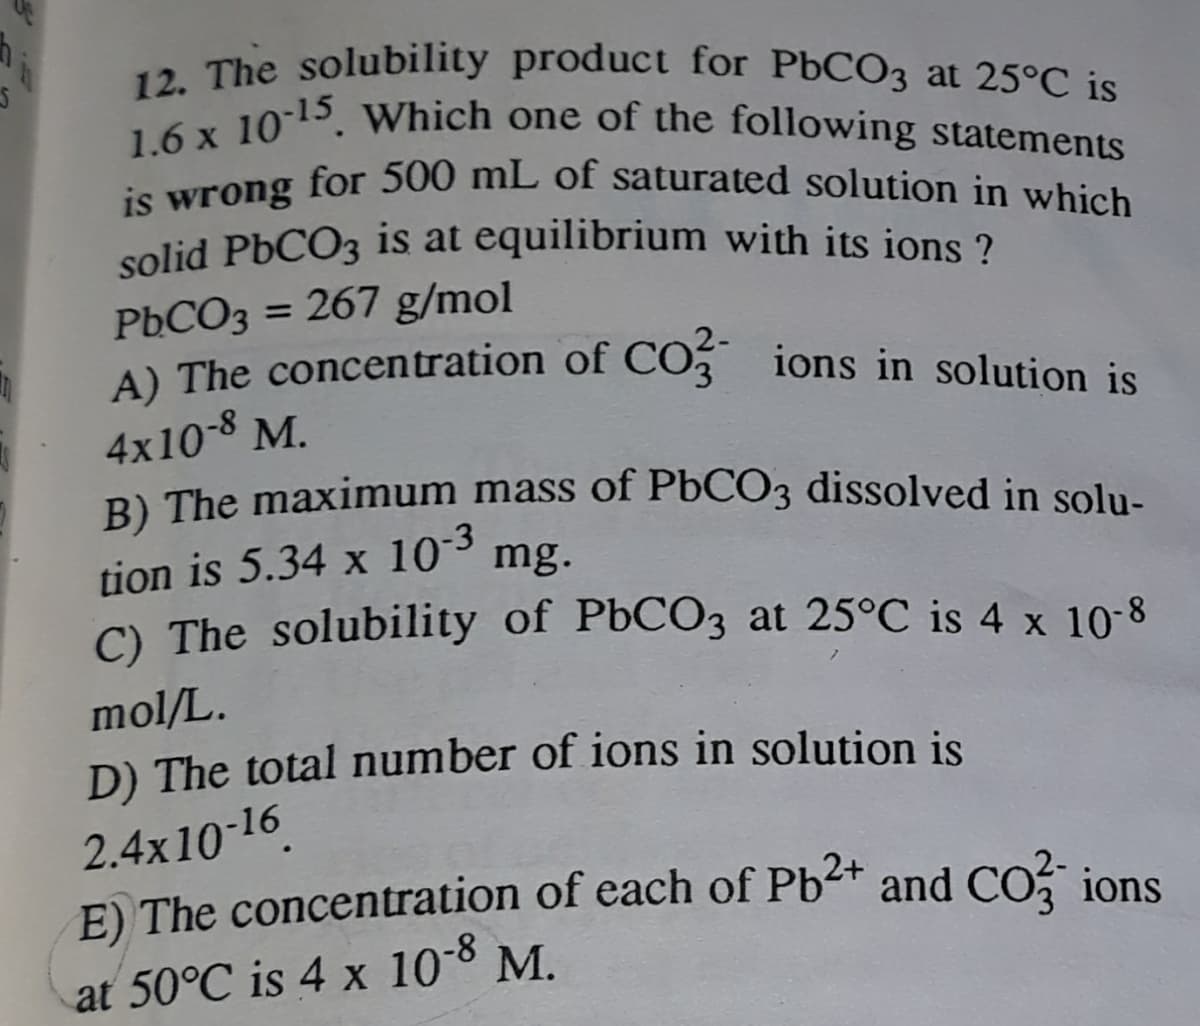 solid P6CO3 is at equilibrium with its ions ?
A) The concentration of CO ions in solution is
is wrong for 500 mL of saturated solution in which
1.6 x 1015. Which one of the following statements
12. The solubility product for PbCO3 at 25°C is
for 500 mL of saturated solution in which
is
wrong
PbCO3 = 267 g/mol
A) The concentration of CO3 ions in solution is
%3D
4x10-8 M.
B) The maximum mass of P6CO3 dissolved in solu-
-3
tion is 5.34 x 10° mg.
C) The solubility of P6CO3 at 25°C is 4 x 10-8
mol/L.
D) The total number of ions in solution is
2.4x10-16.
E) The concentration of each of Pb<+ and CO, ions
at 50°C is 4 x 10-8 M.
